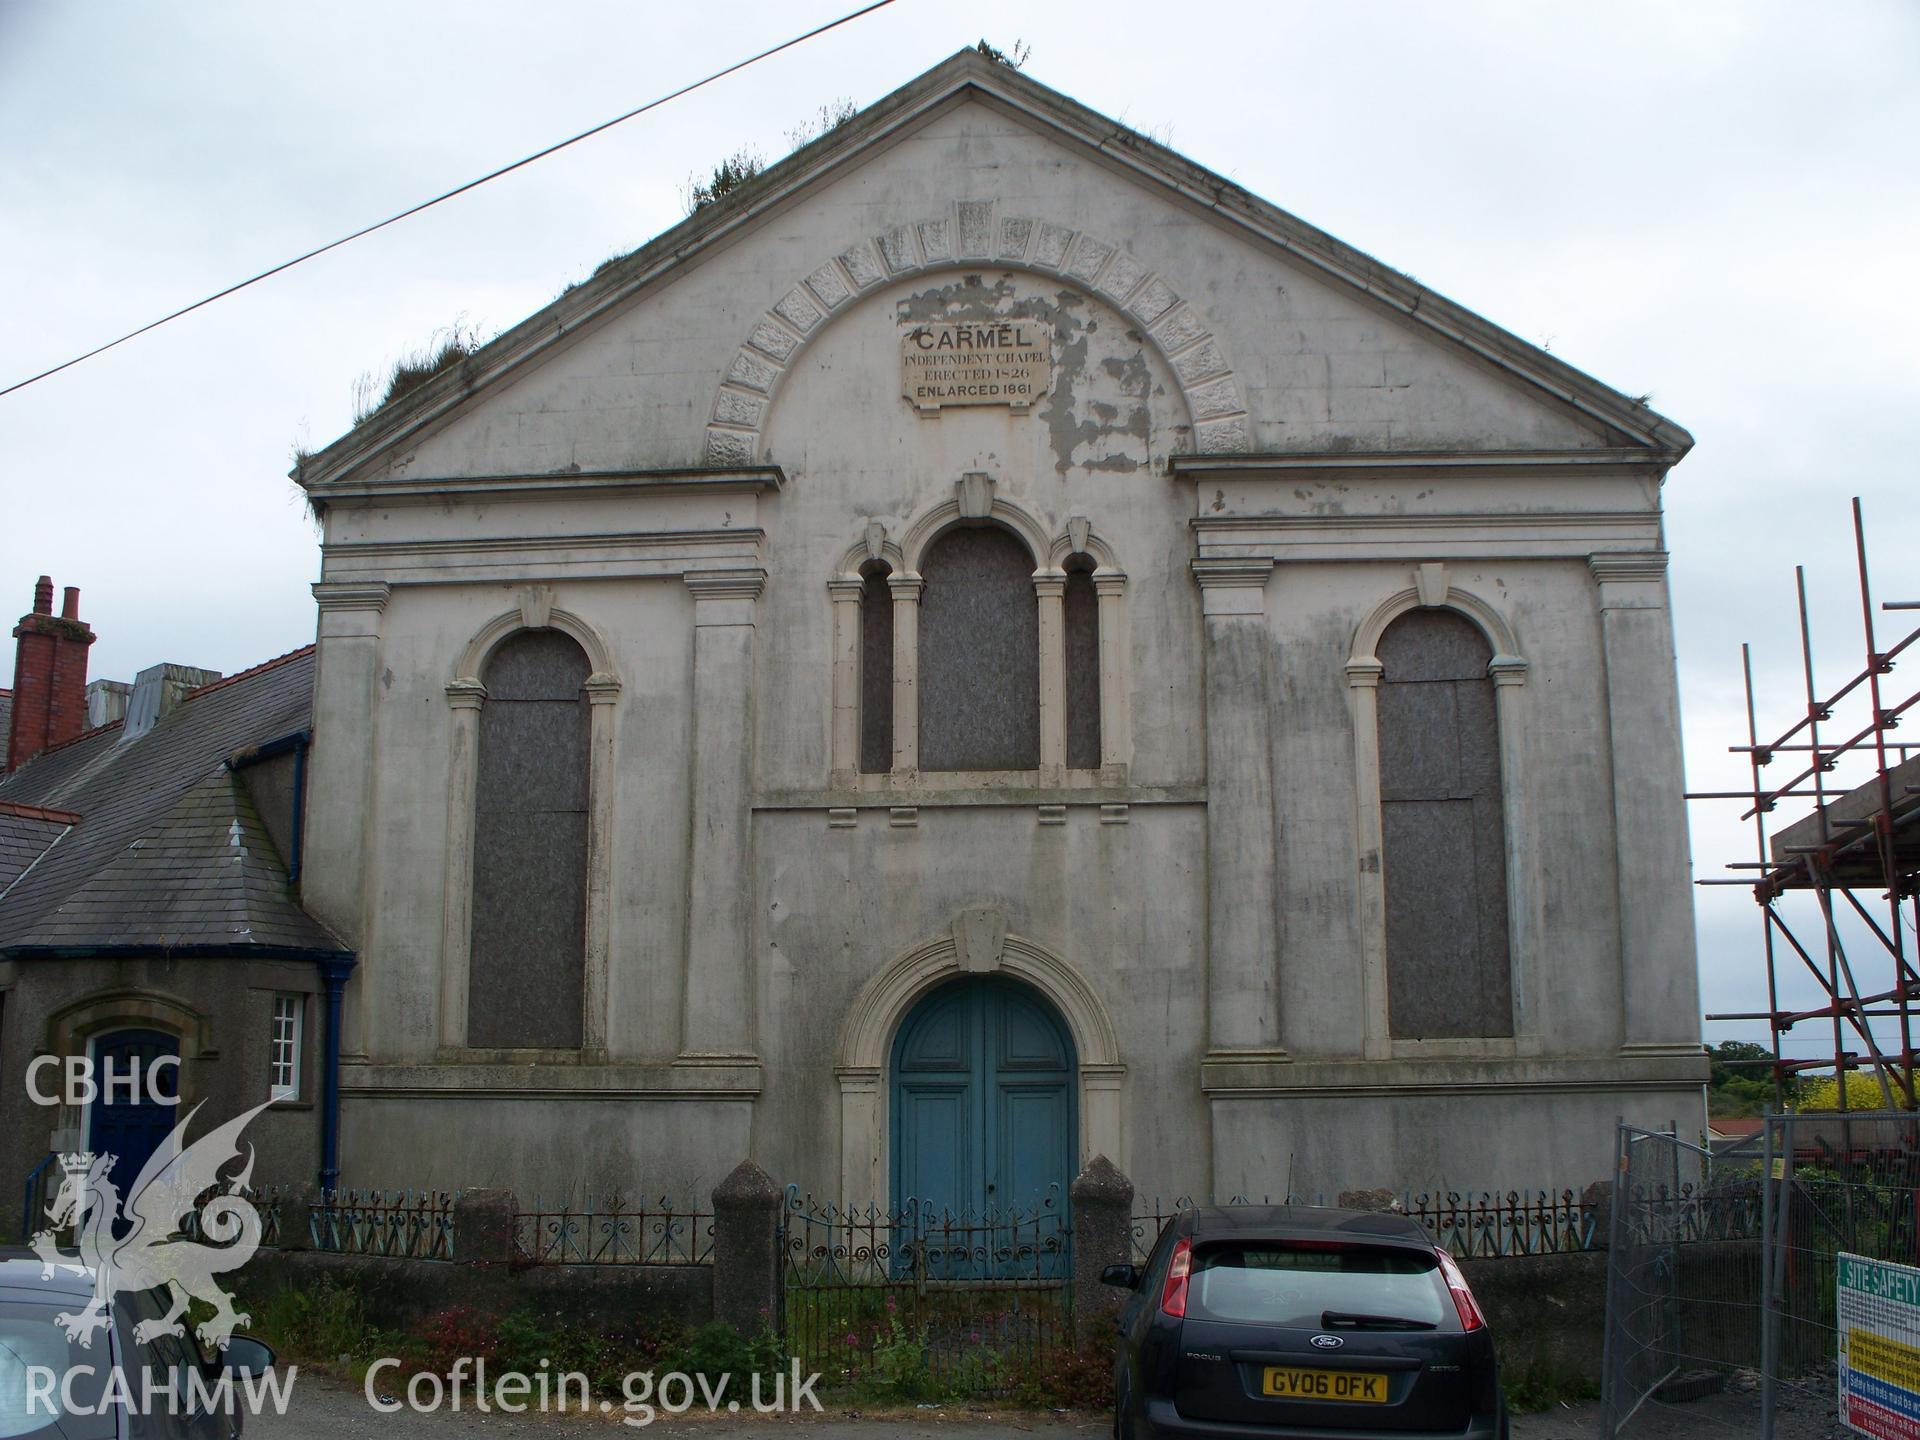 North east gable front and entrance.